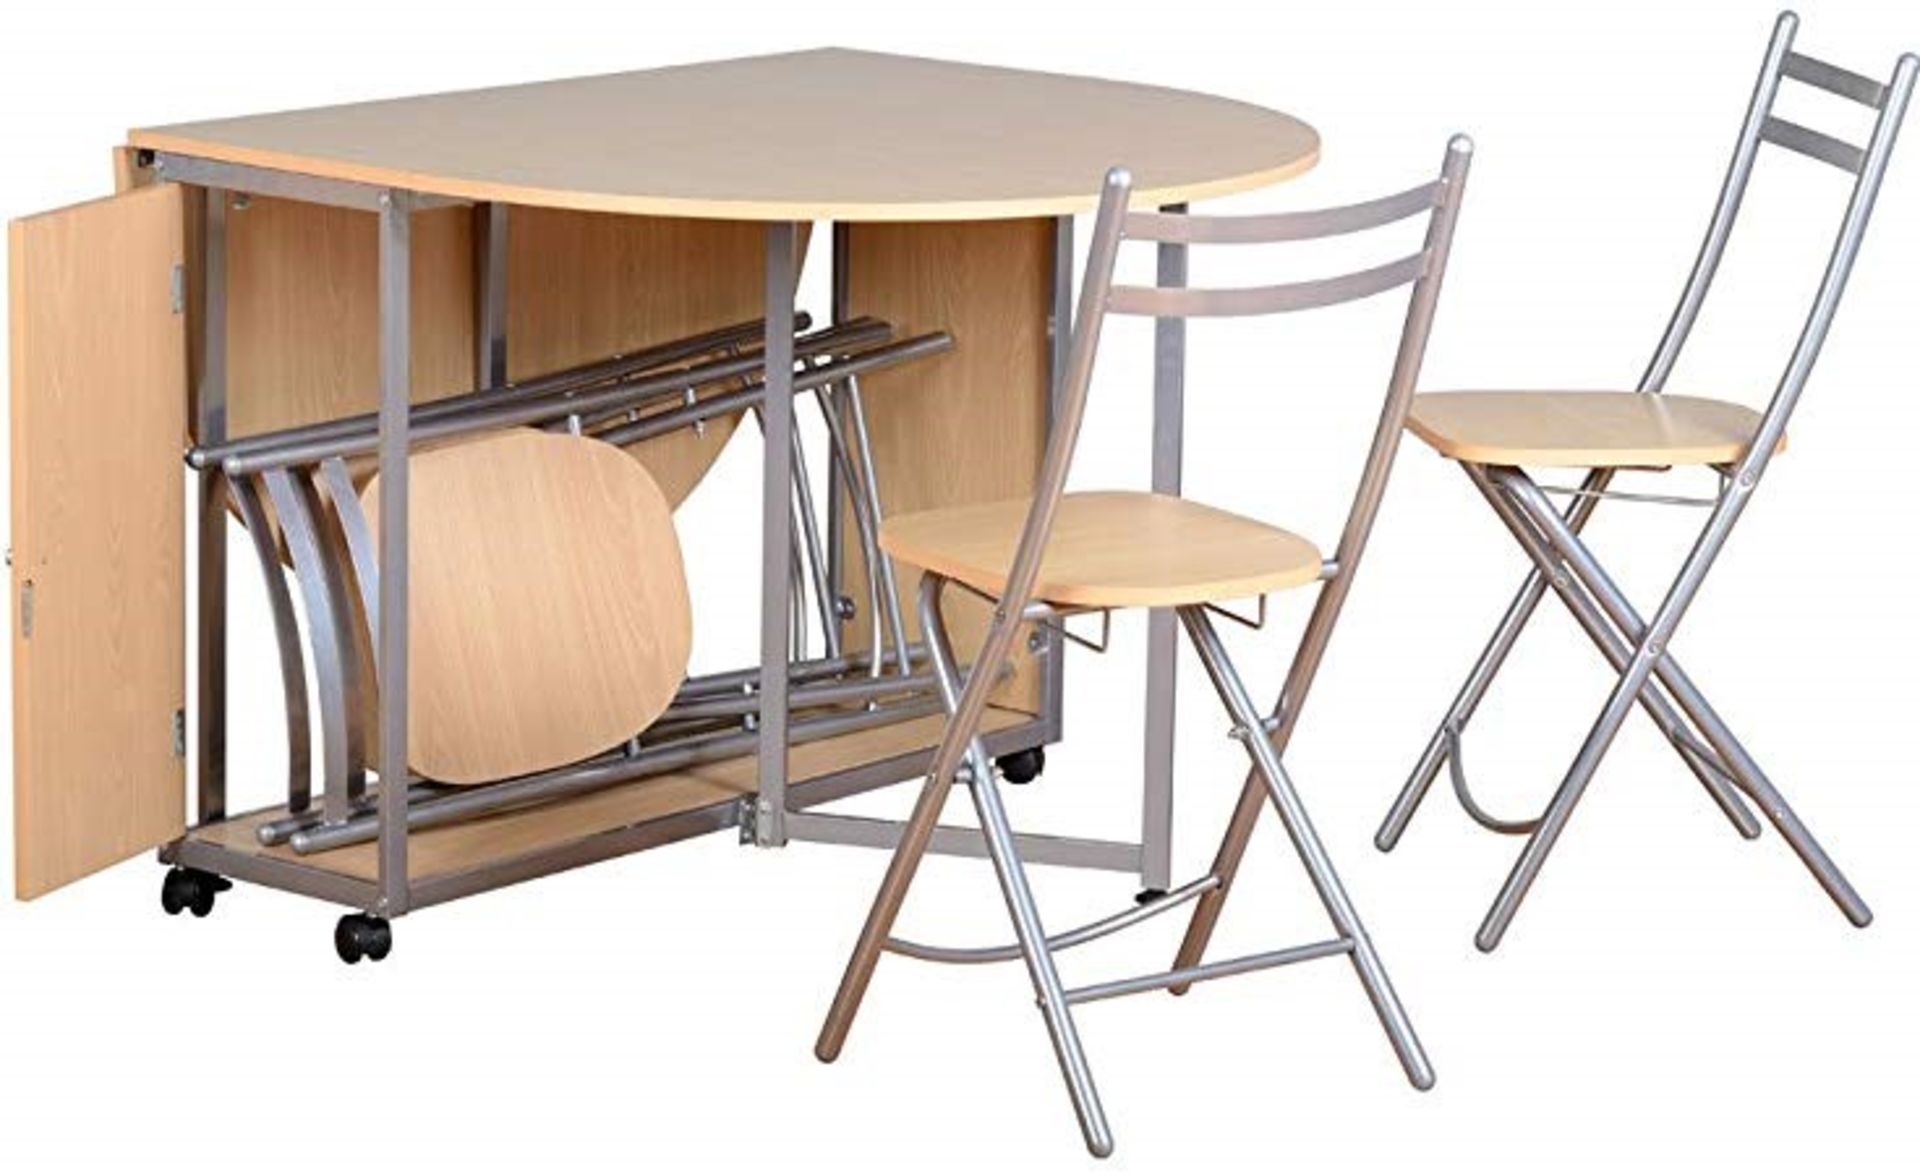 1 WRAPPED BUTTERFLY DINING SET IN BEECH (PUBLIC VIEWING AVAILABLE)